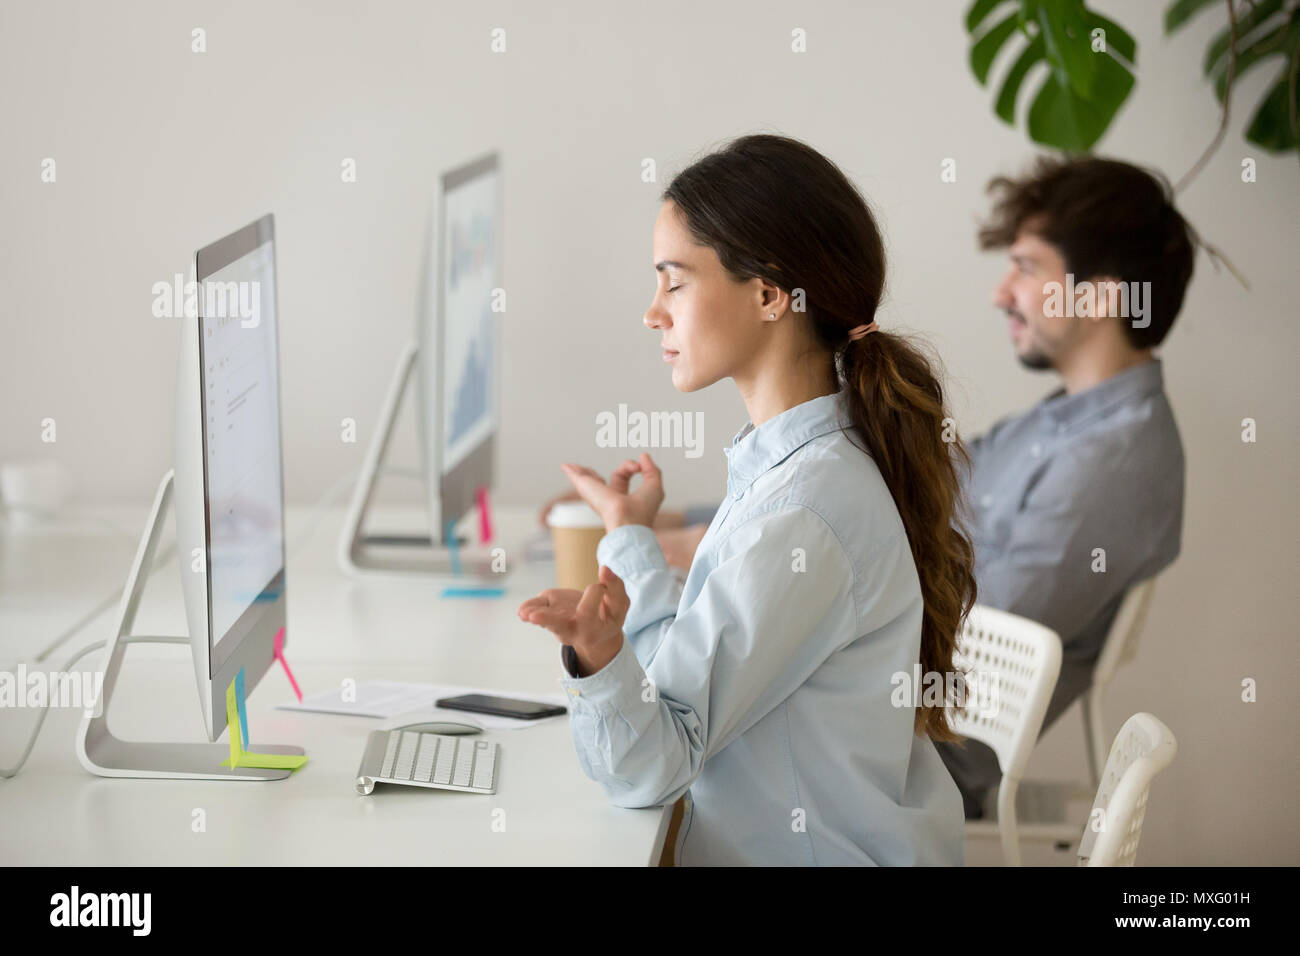 Concentrated female employee meditating at workplace Stock Photo